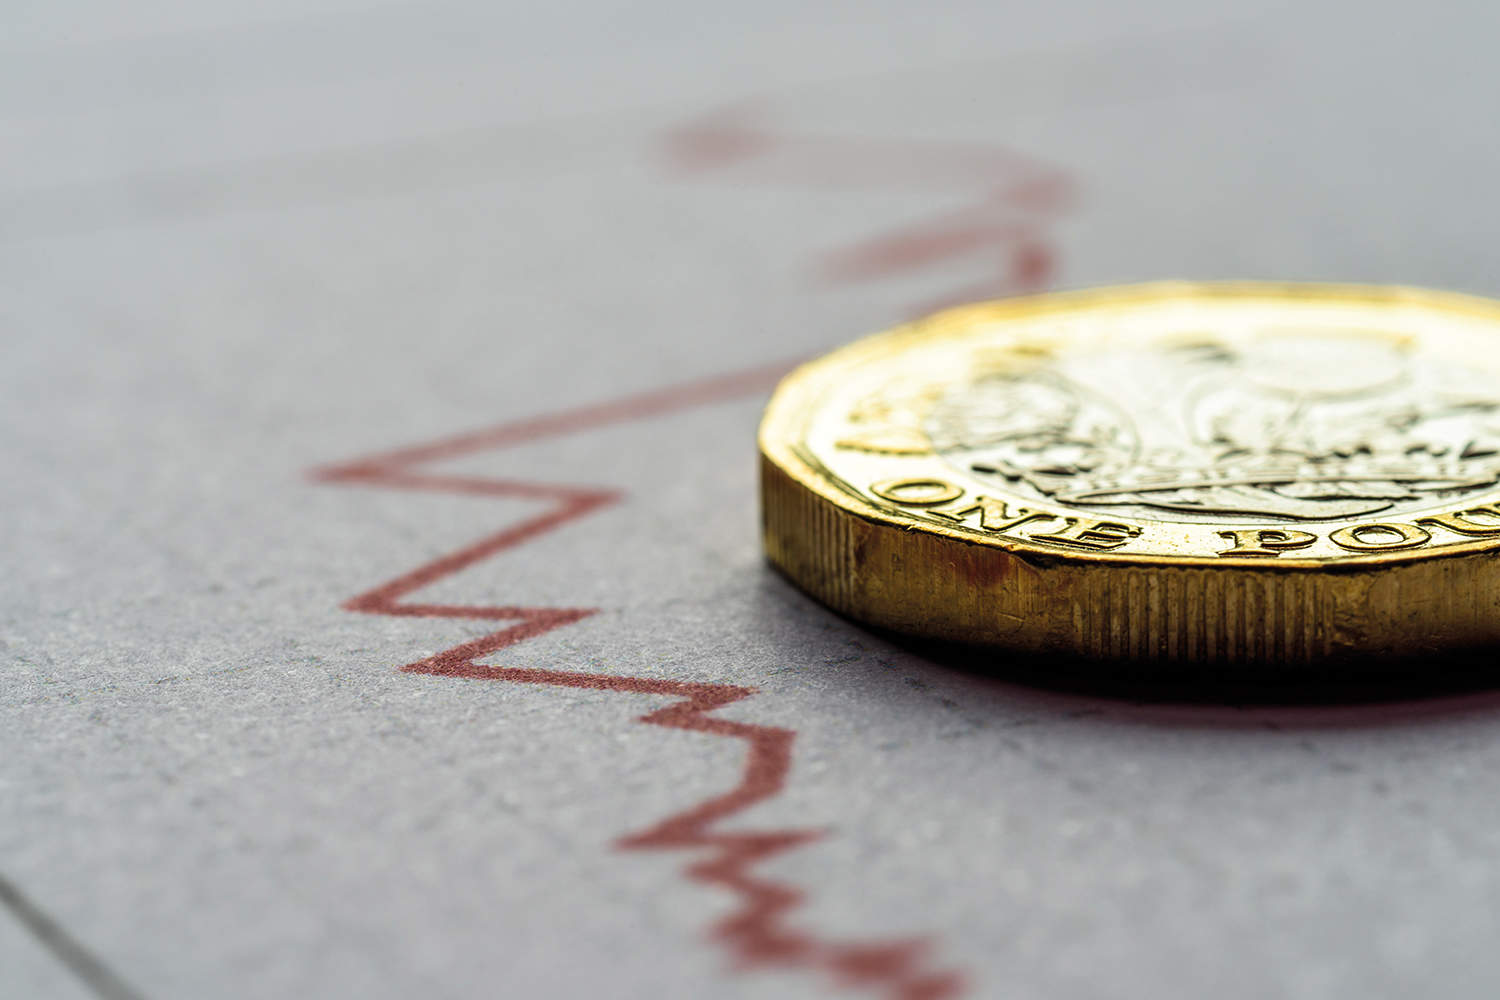 A gold pound coin on a stock market chart.